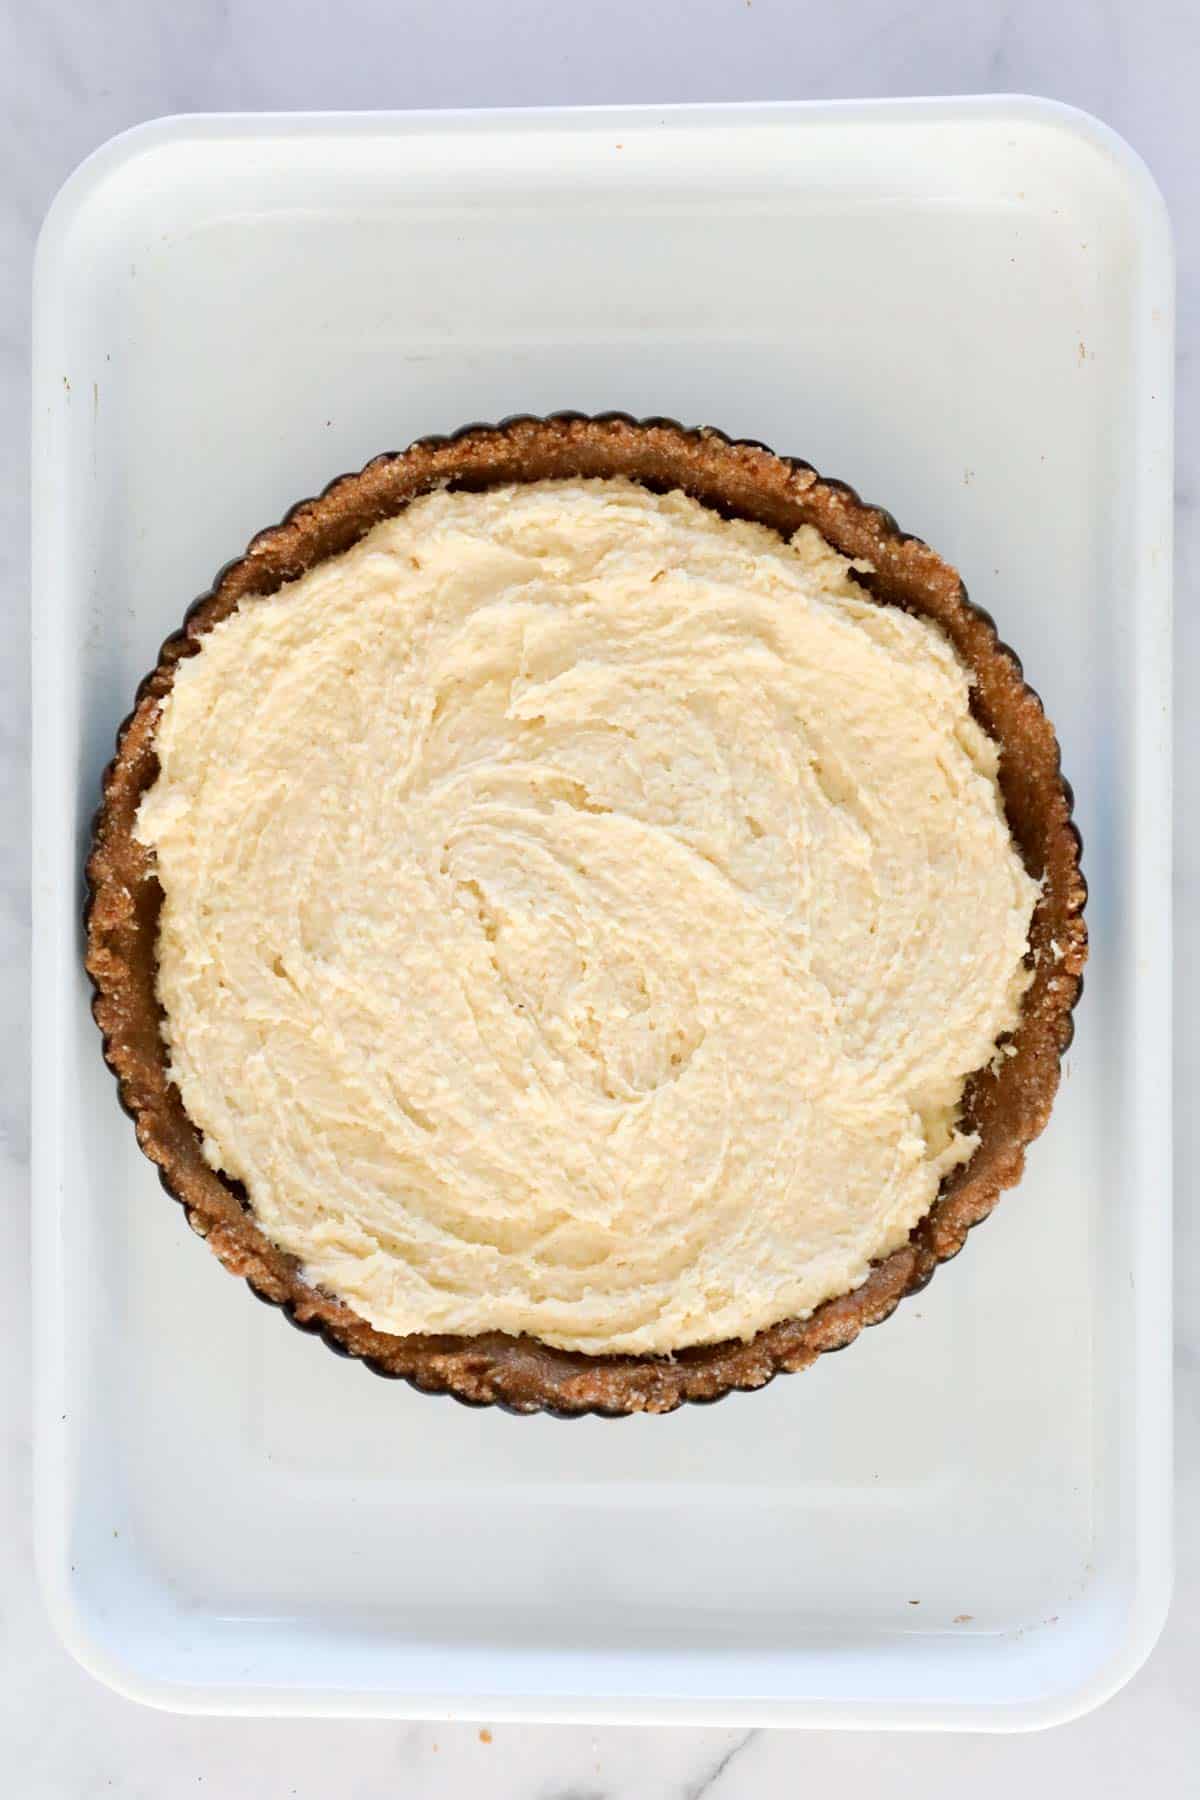 Almond cream spread over biscuit base in tart tin.